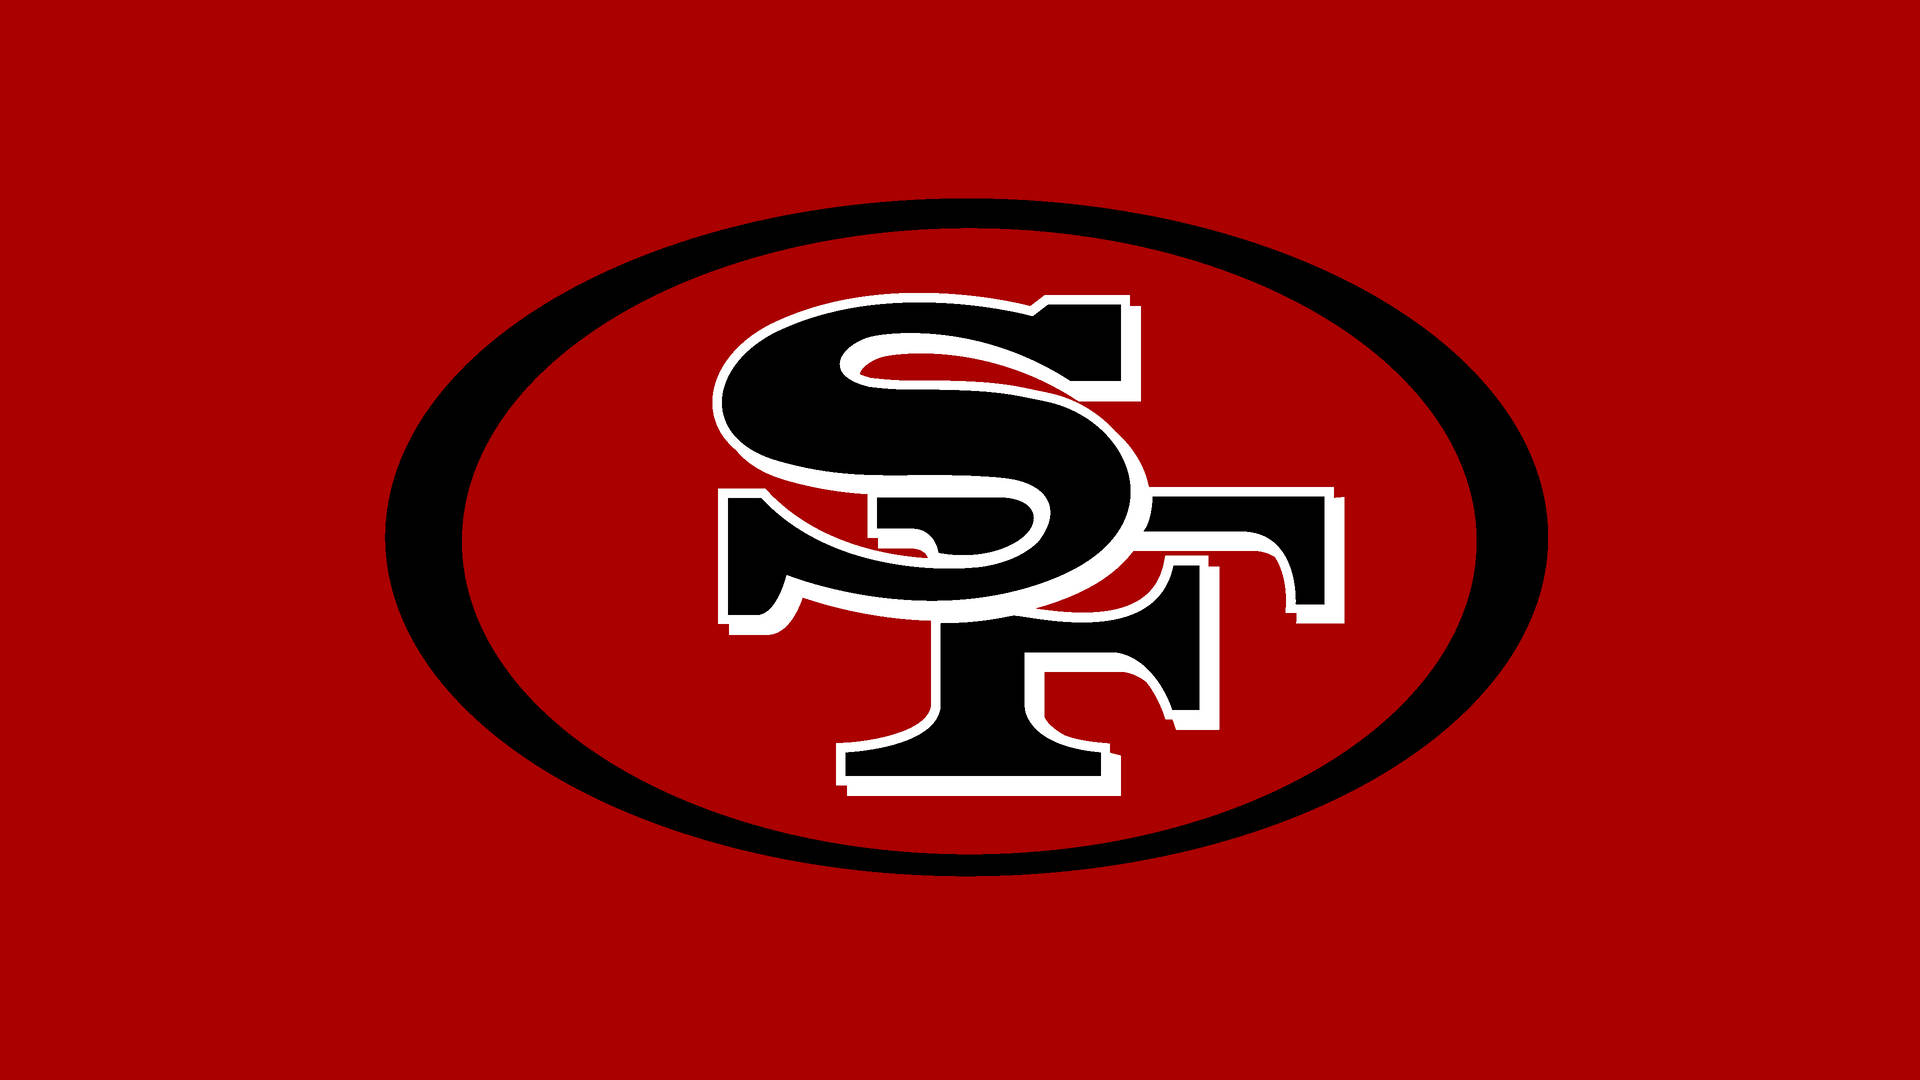 Sf 49ers Logo In Red Background